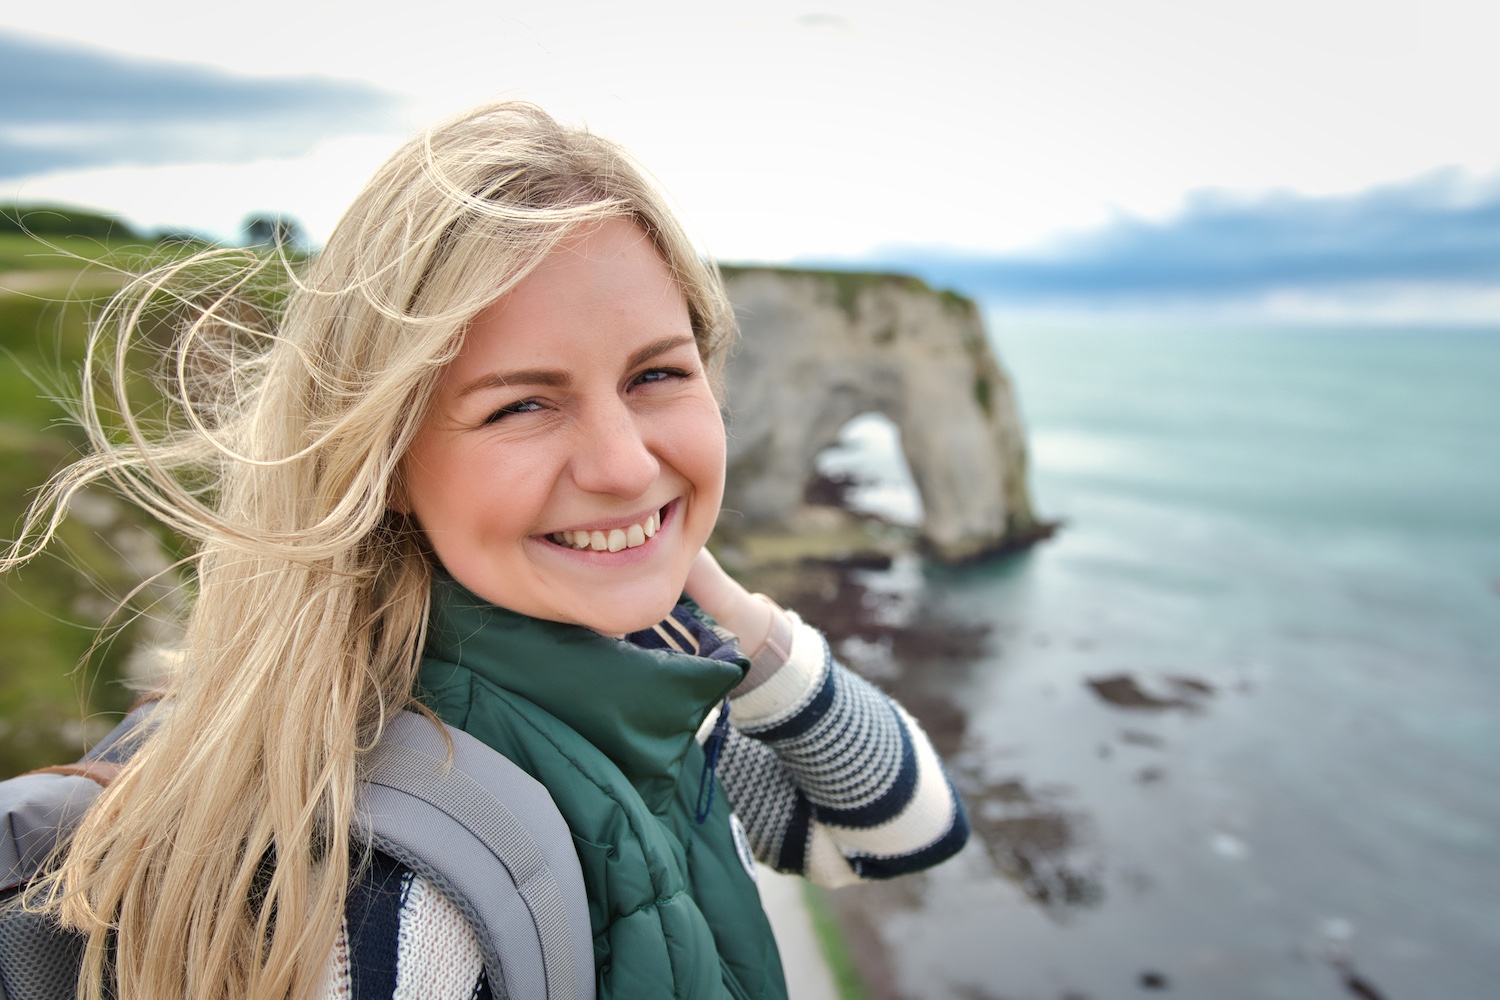 Michelle on the rocks of Étretat, in the background the famous rock arch